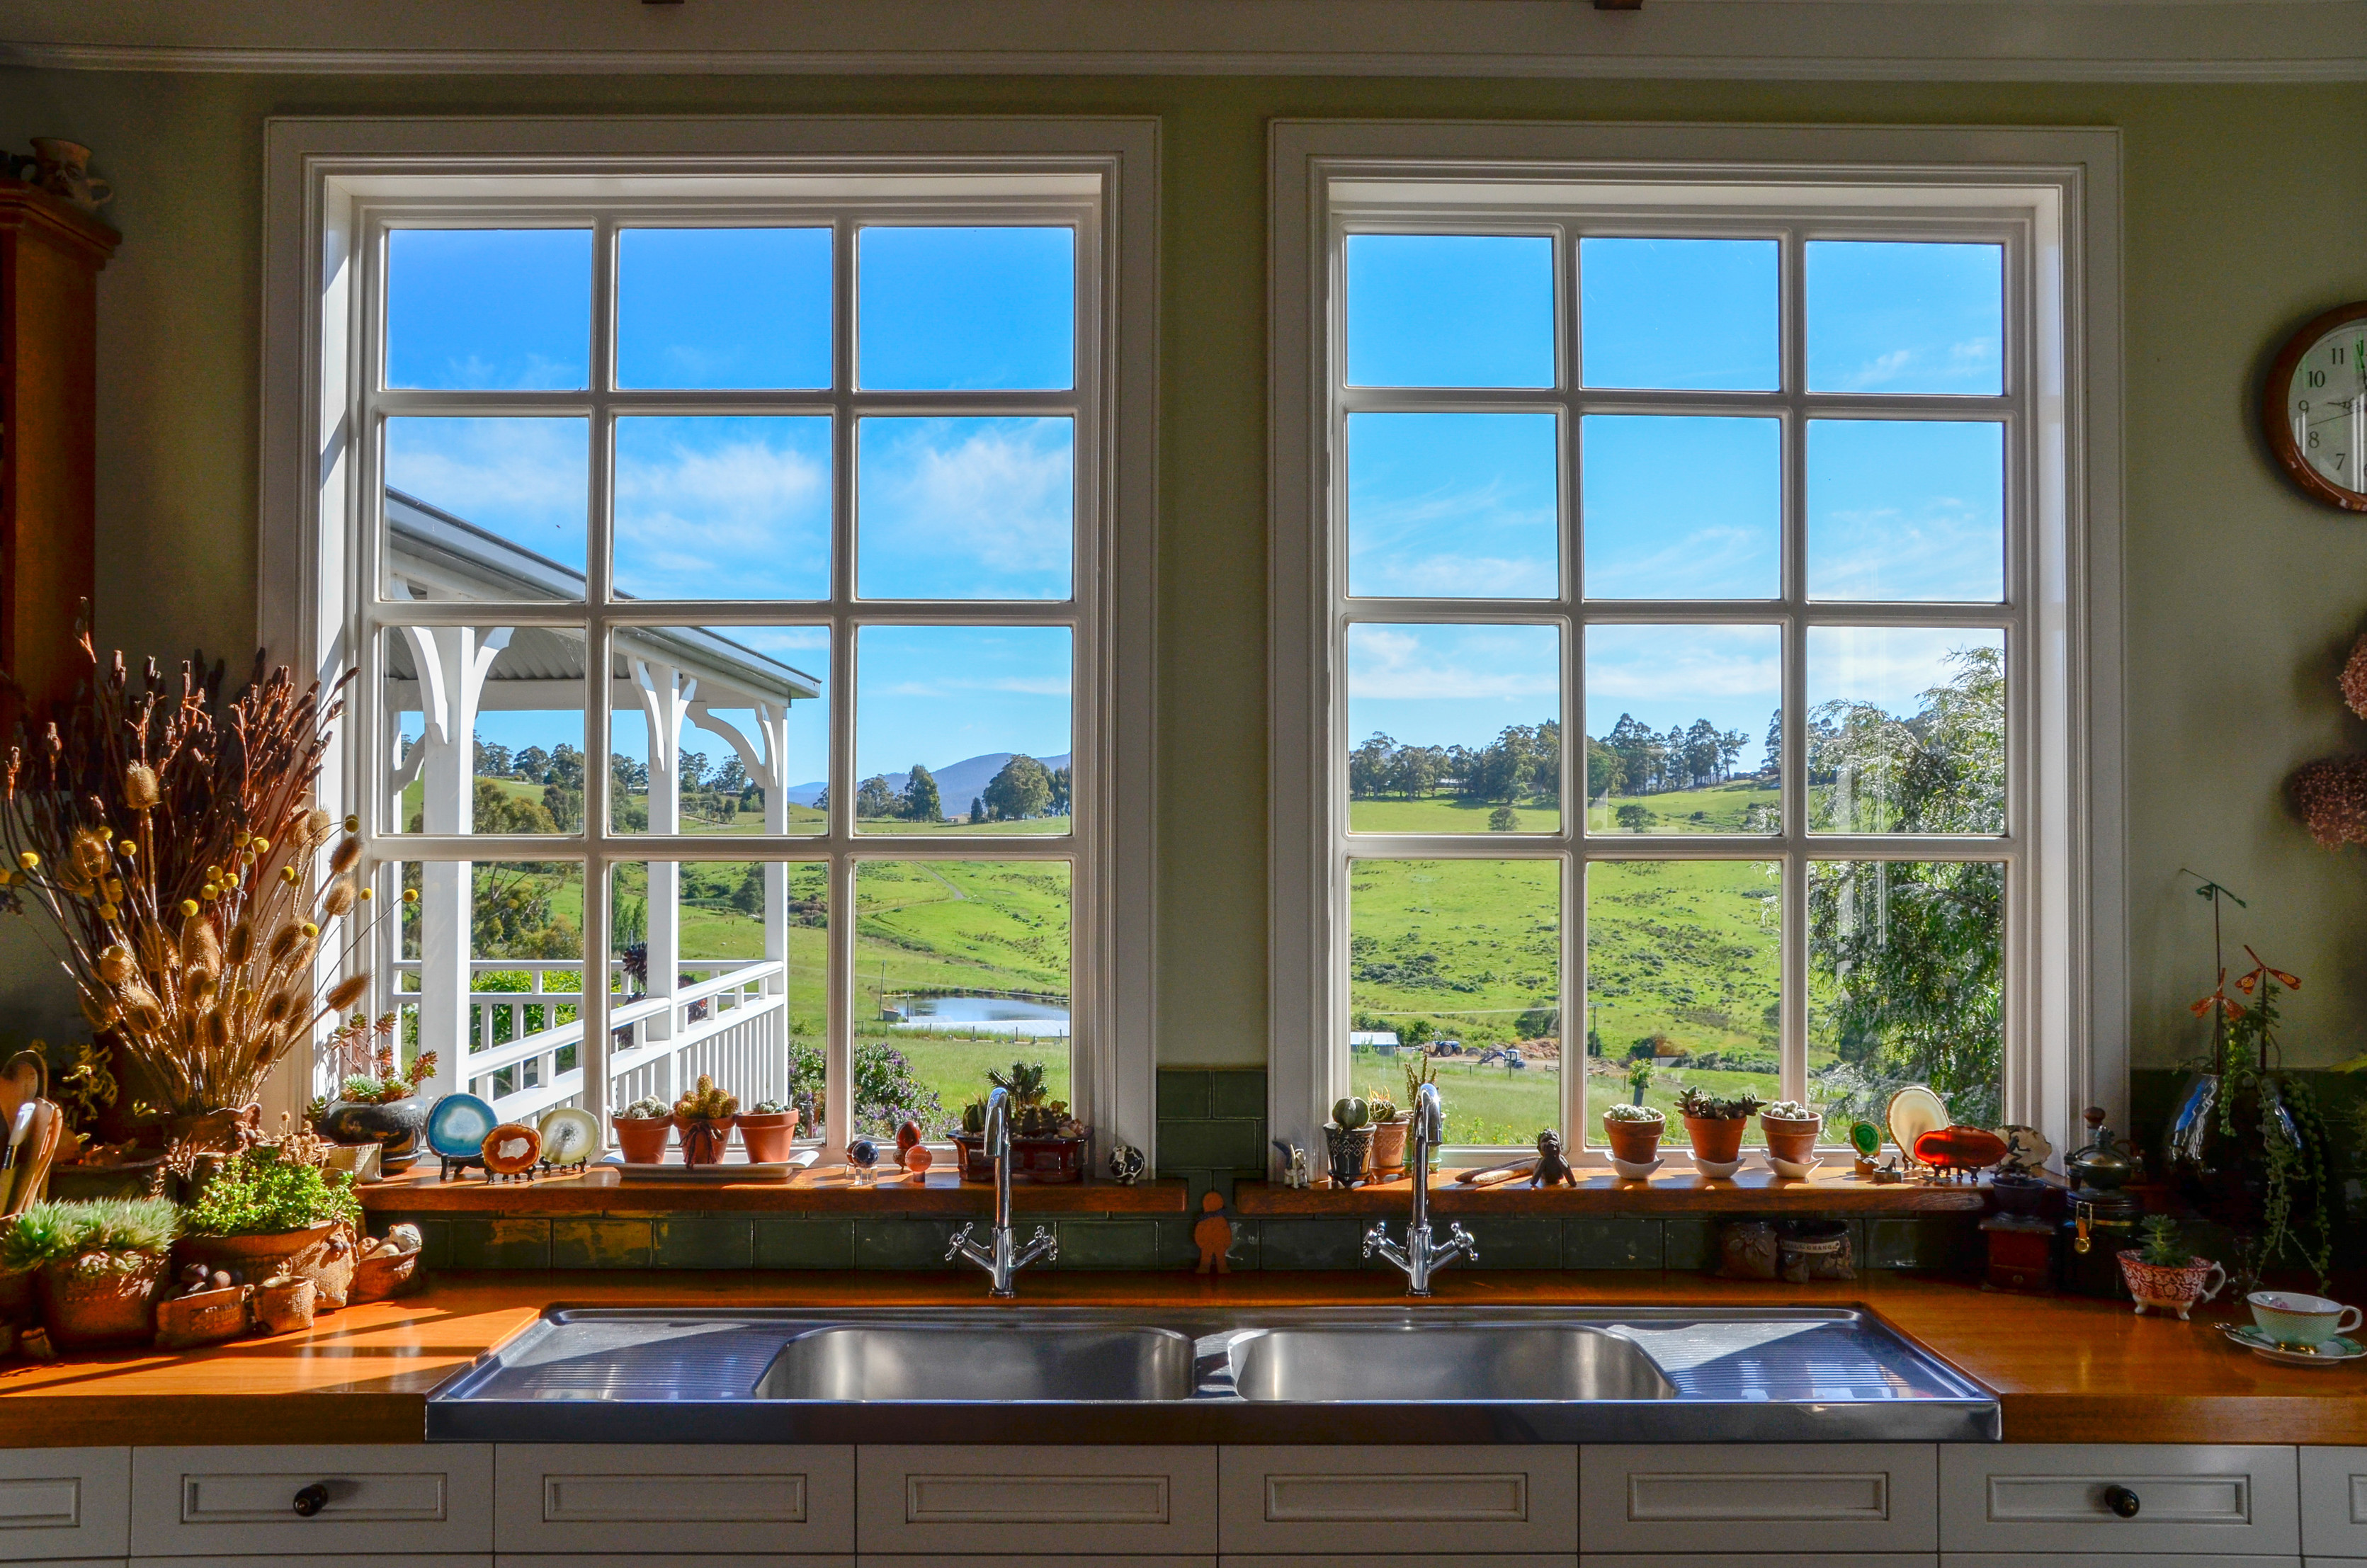 Stunning view through the window from the The Farmhouse Kitchen, nestled in the lush green hills of Wattle Grove. 